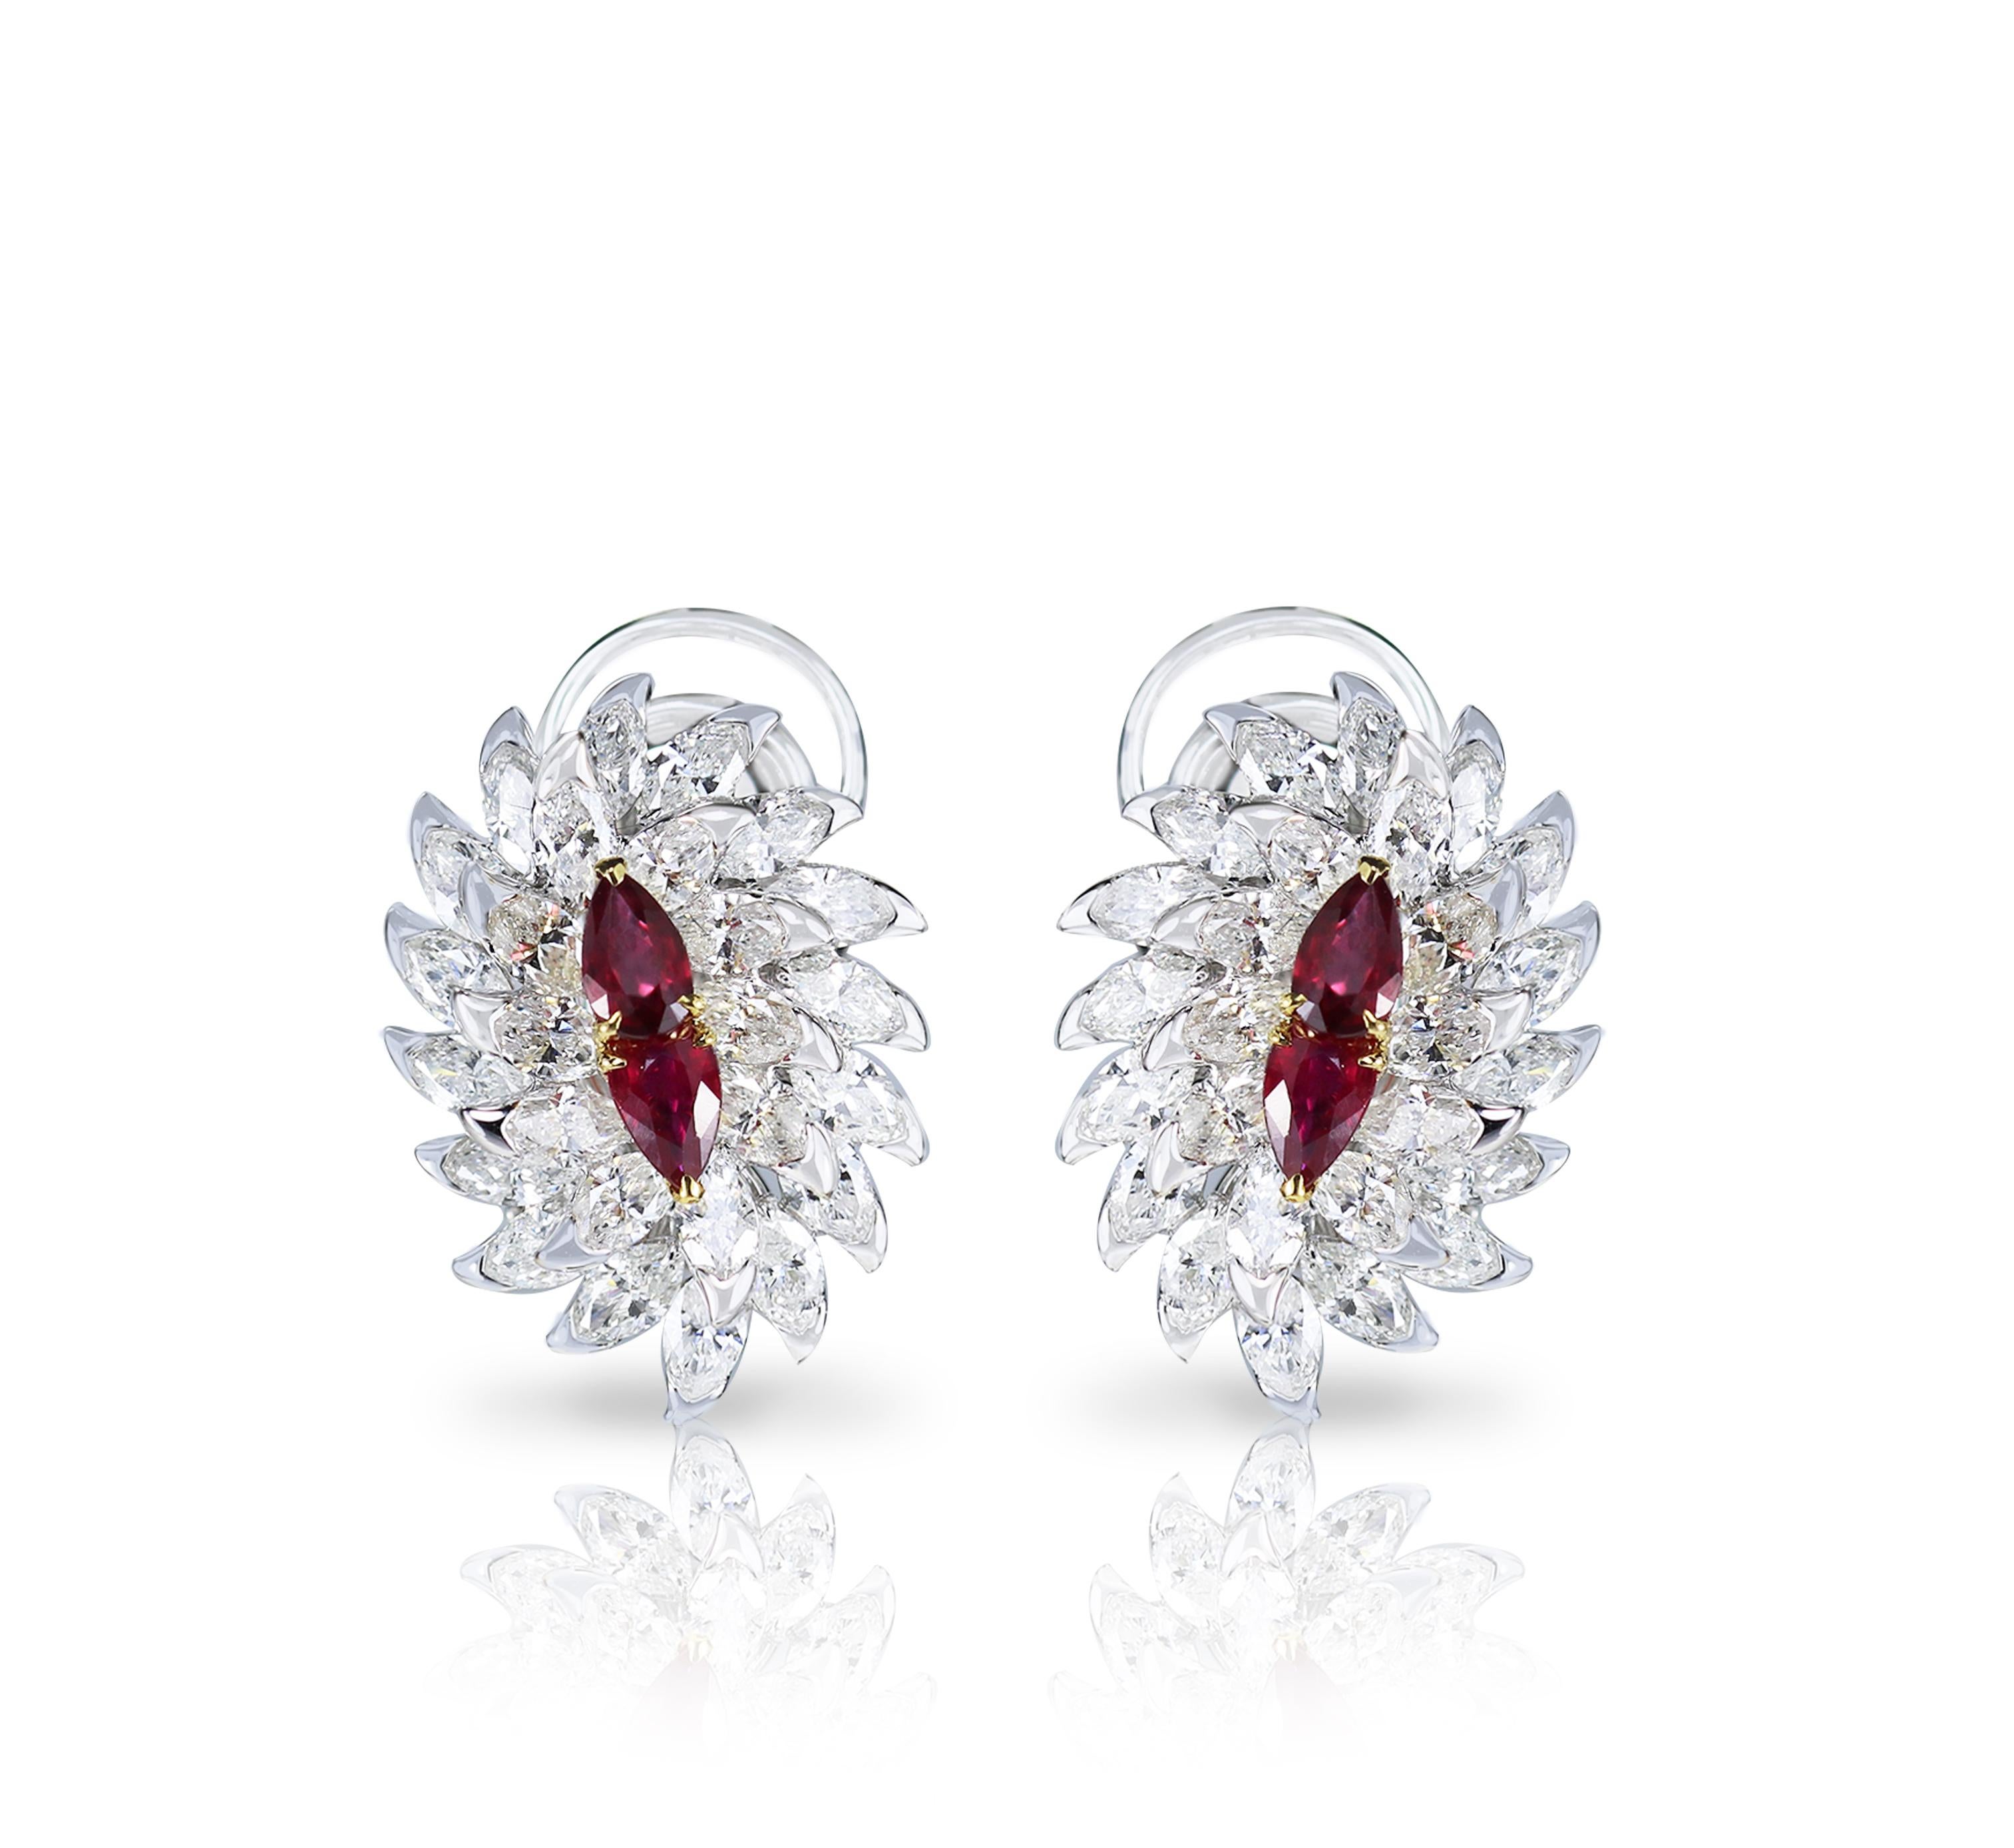 Diamond and ruby earrings

Carefully crafted and exquisitely designed, this pair of 18K white and yellow gold stud earrings studded with brilliant cut marquise diamonds and rubies is elegant and sleek. Featuring 56 stones, this pair is the ideal